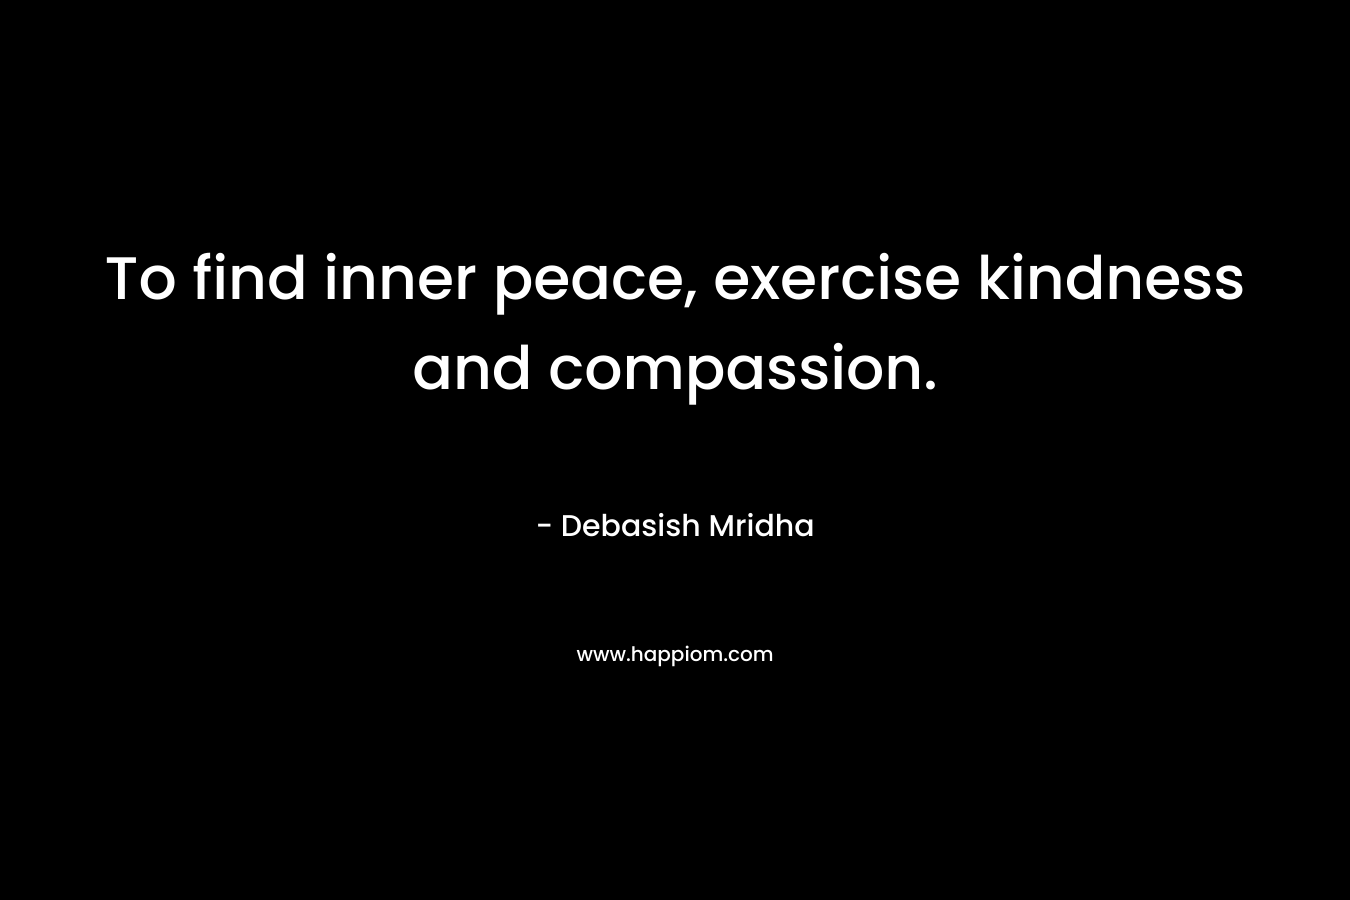 To find inner peace, exercise kindness and compassion.